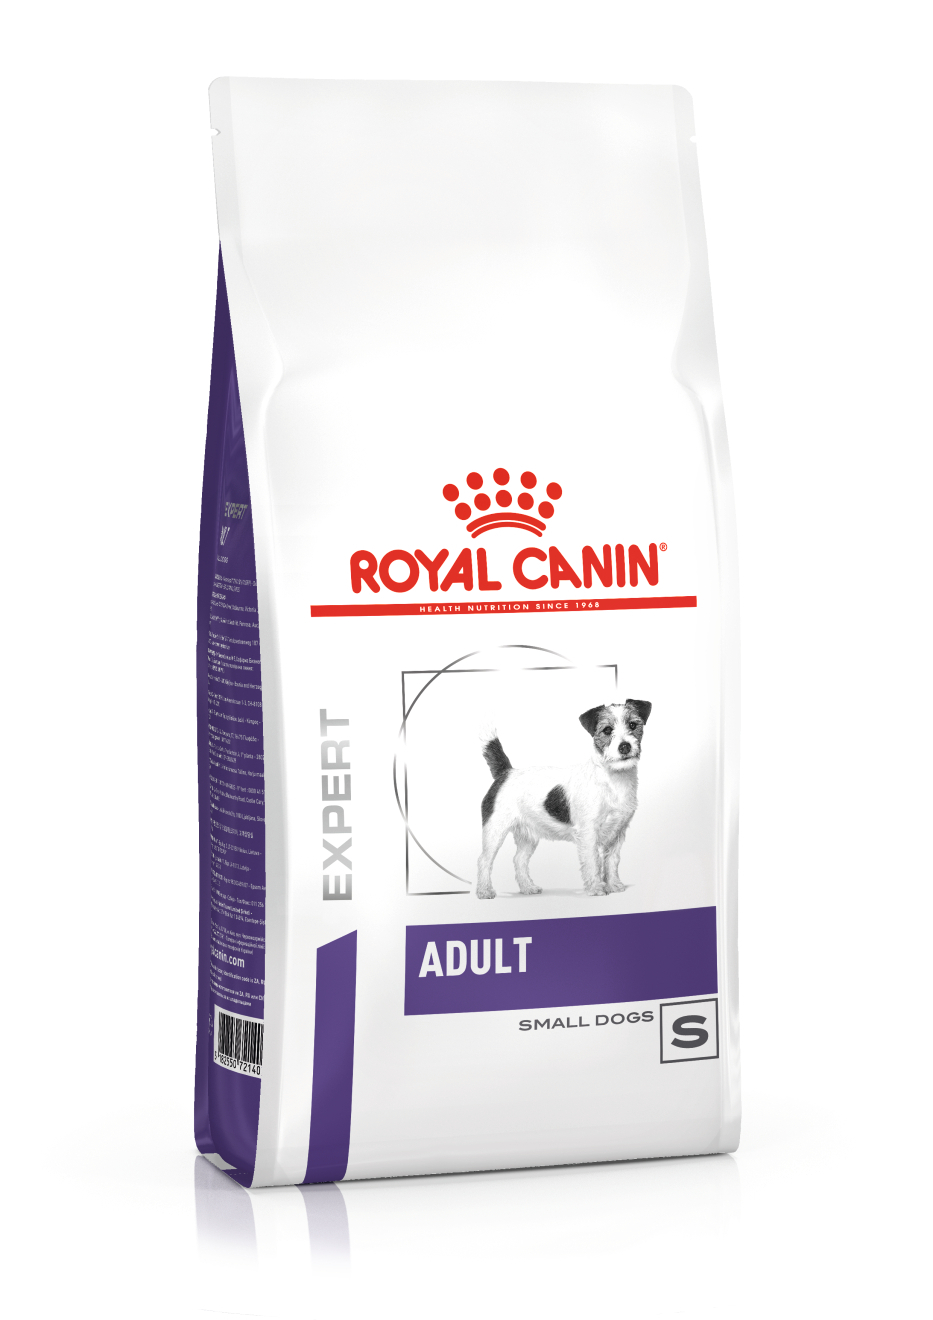 Royal Canin Expert Adult Small Dogs para perros pequeños